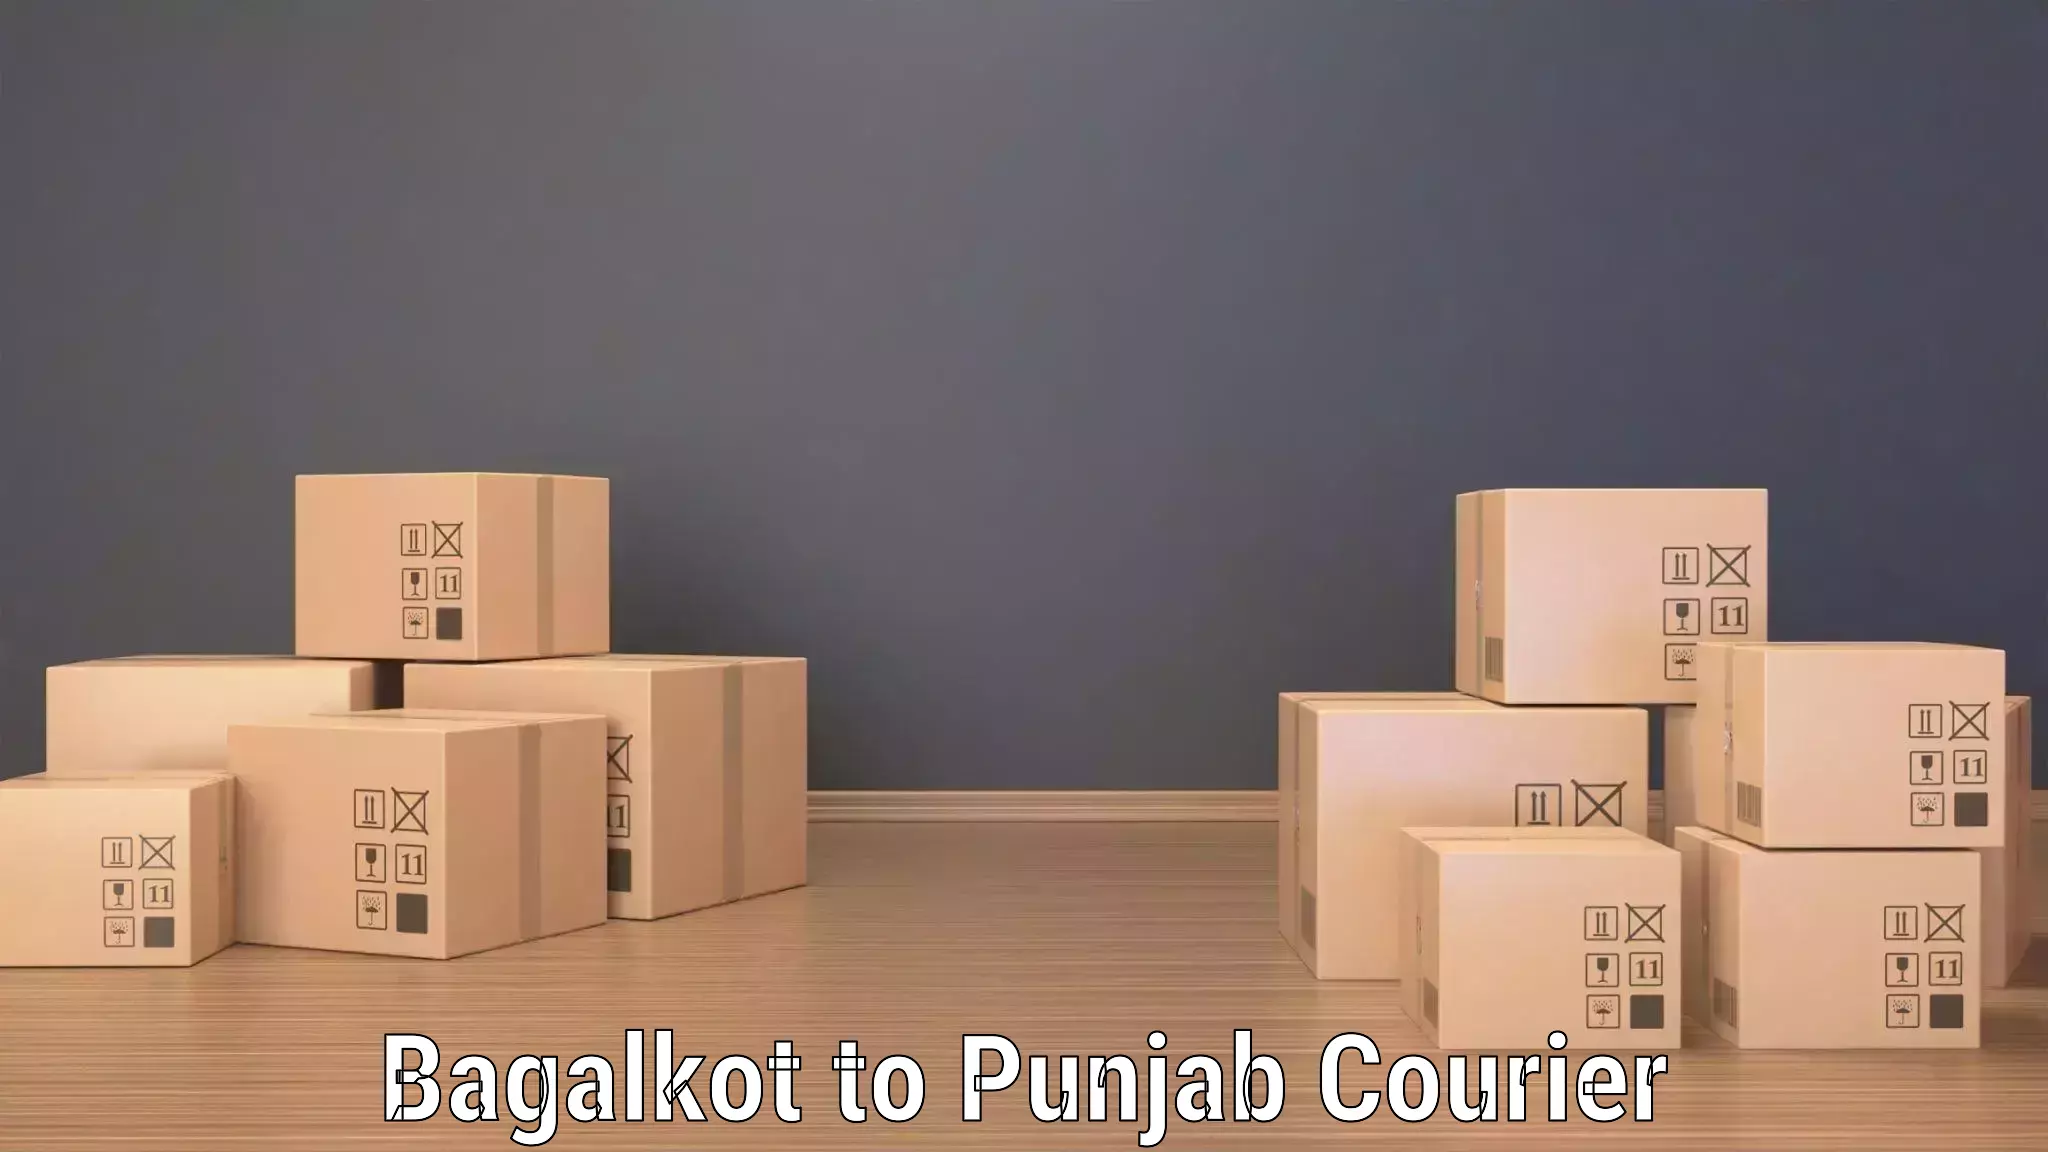 Next day courier Bagalkot to Muktsar